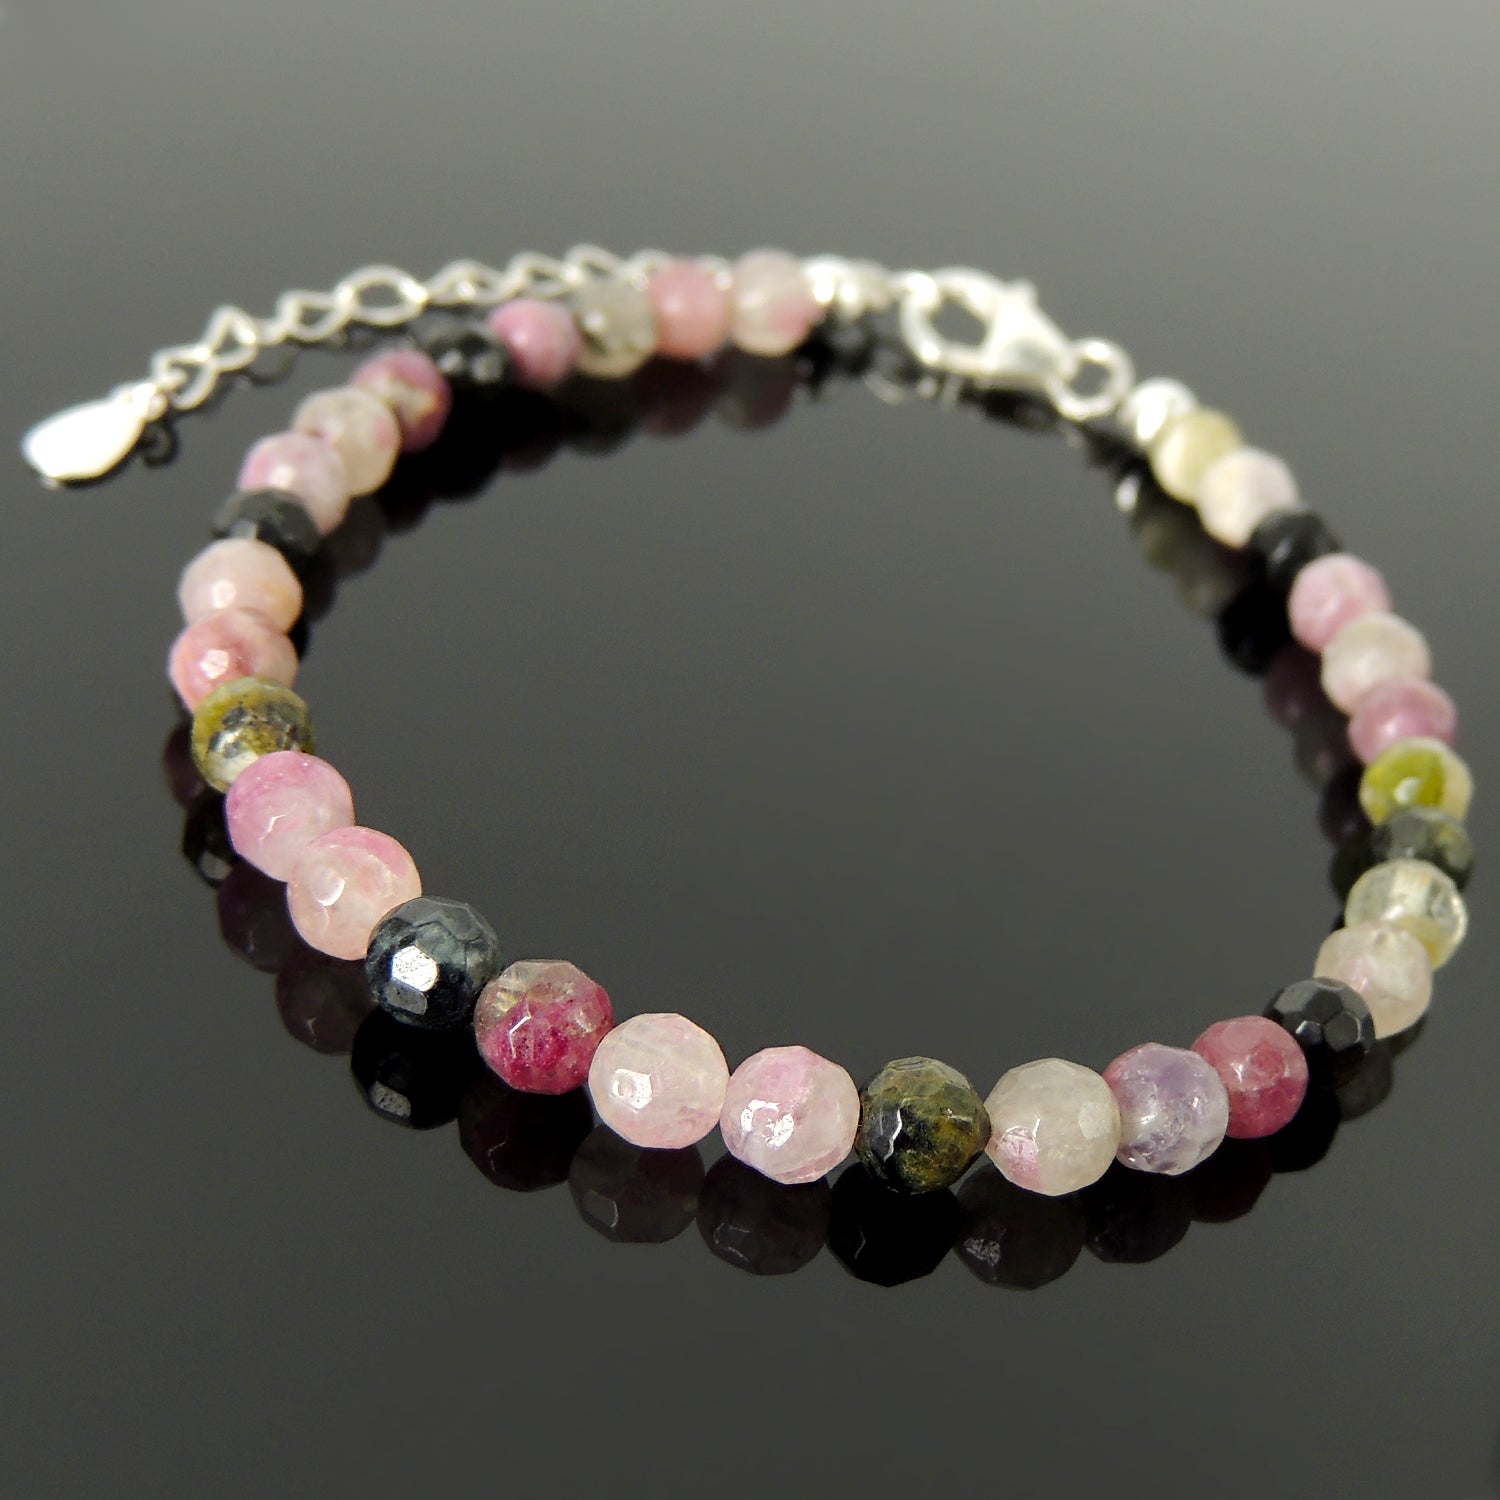 5mm Faceted Multi-color Tourmaline Healing Gemstone Bracelet with S925 Sterling Silver Chain & Clasp - Handmade by Gem & Silver BR1216